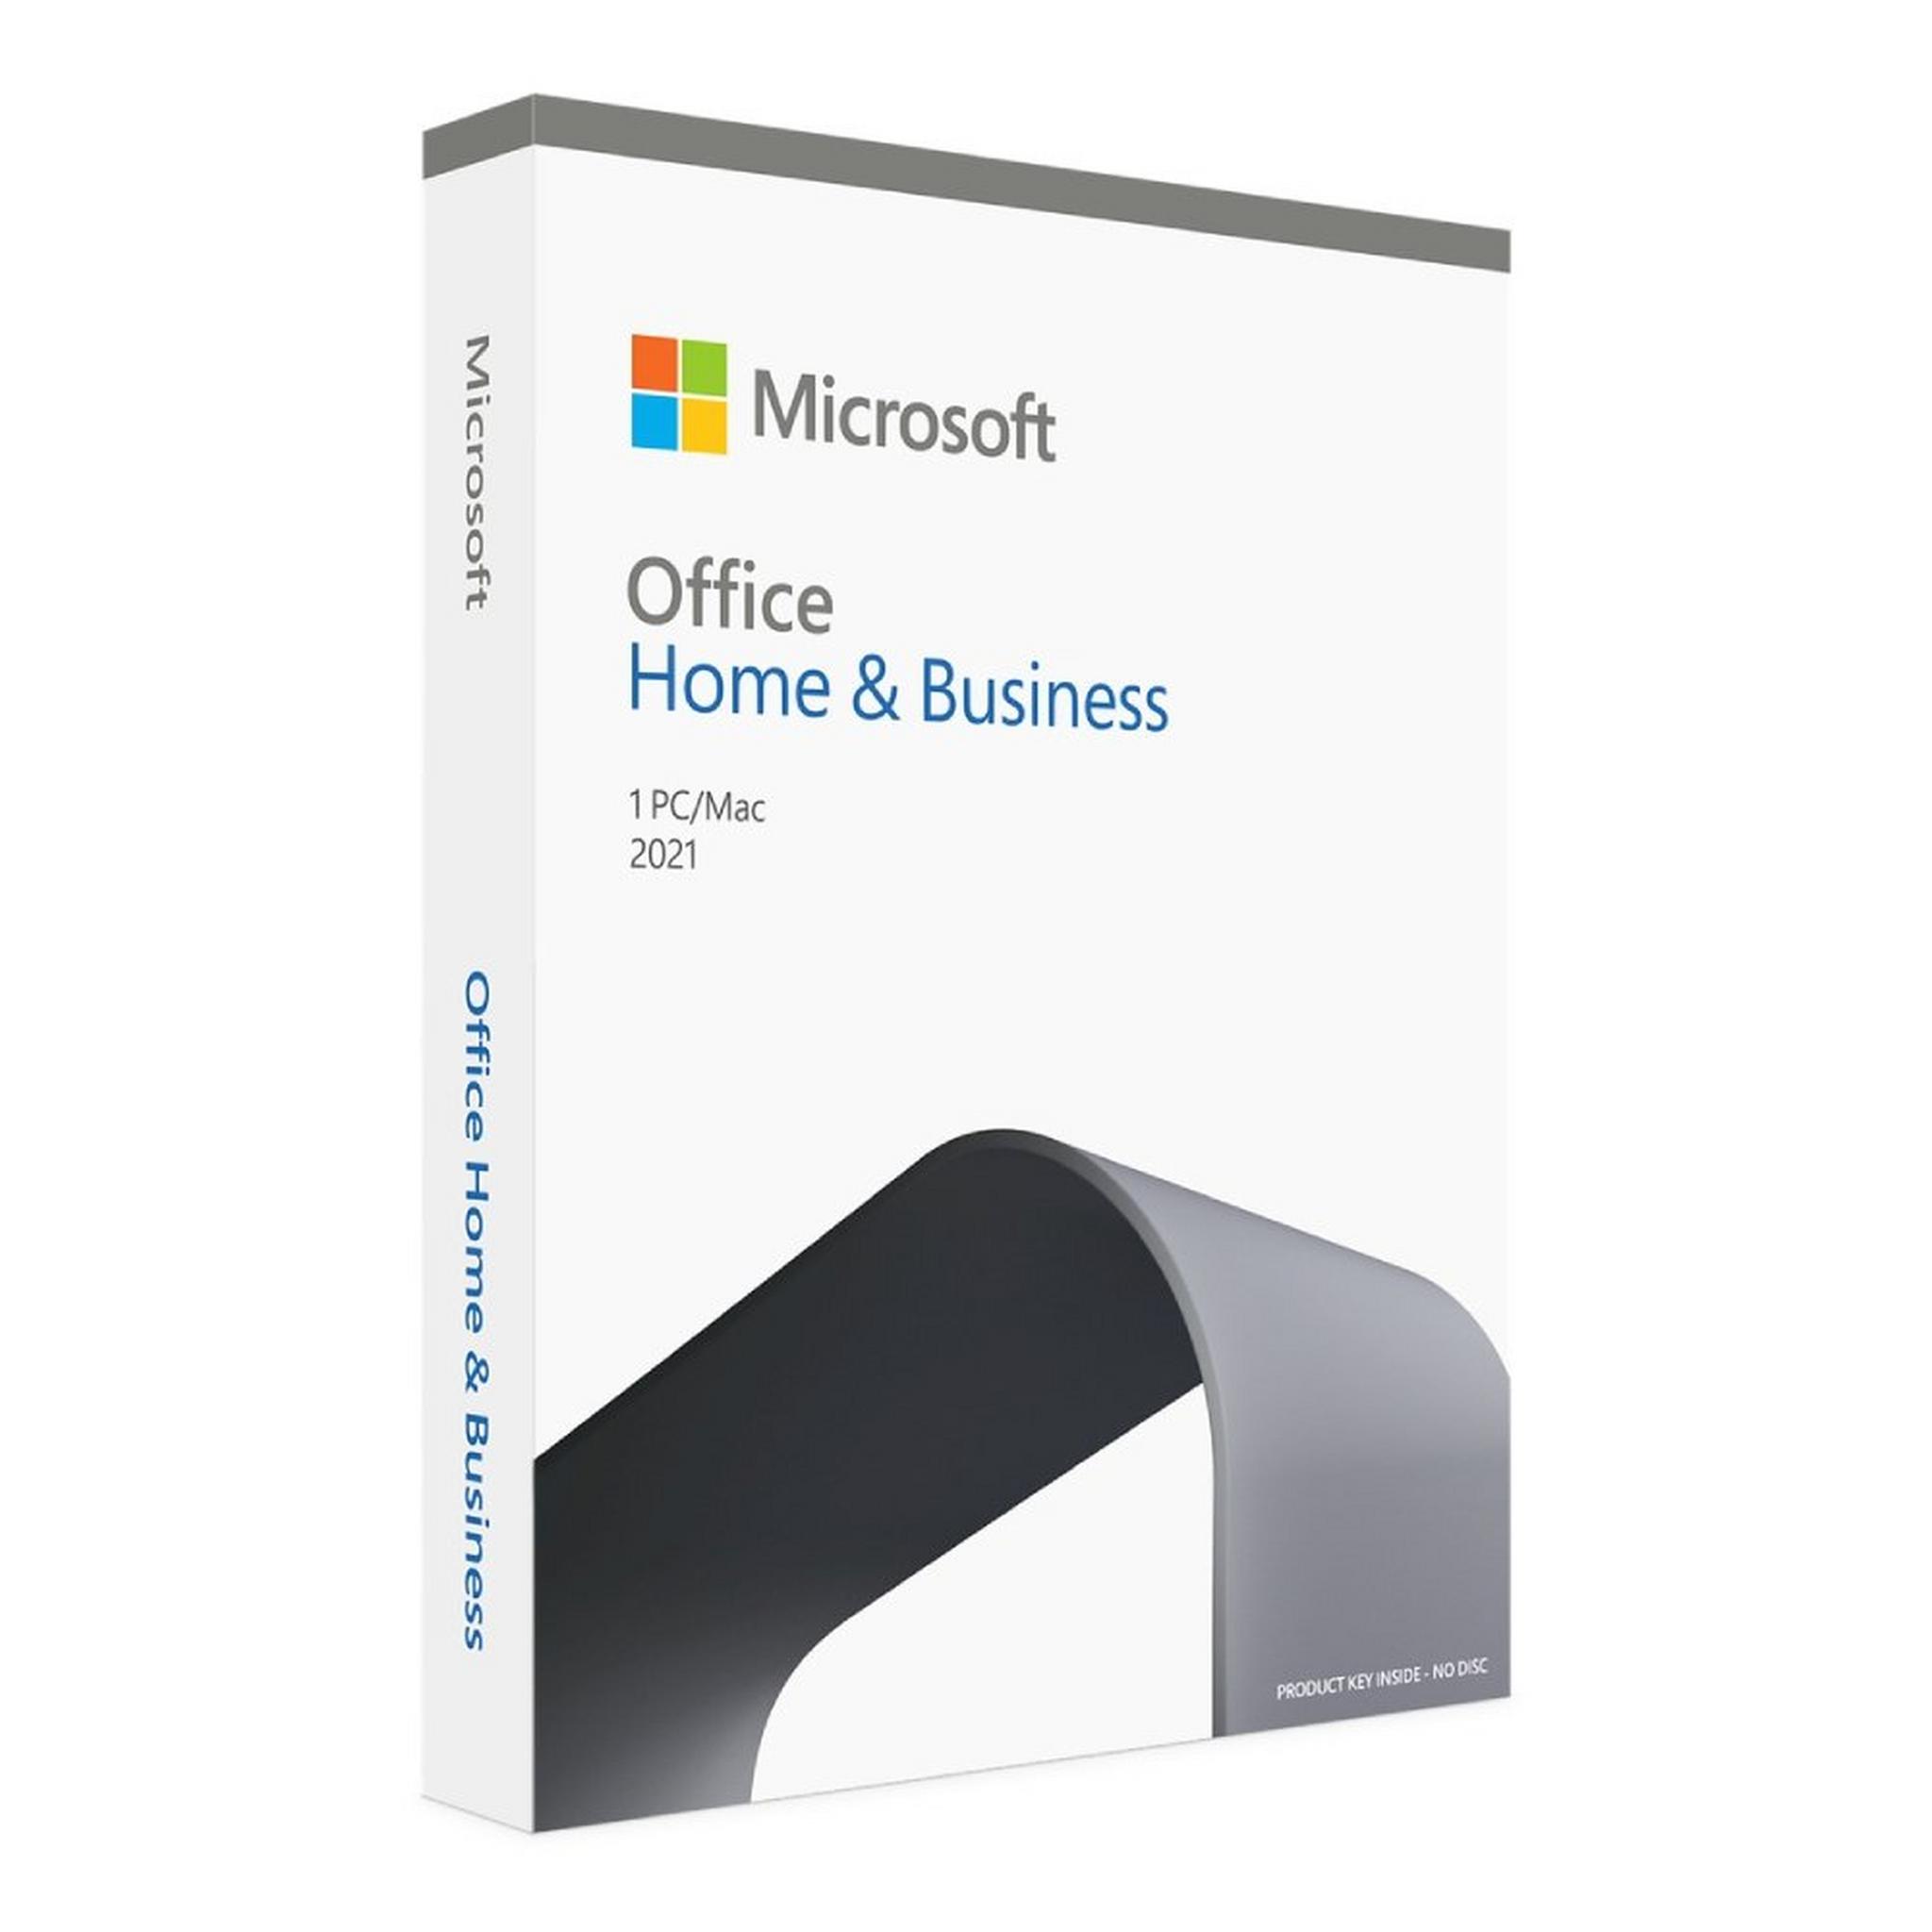 Microsoft Office Home & Business 2021 - Physical Unit